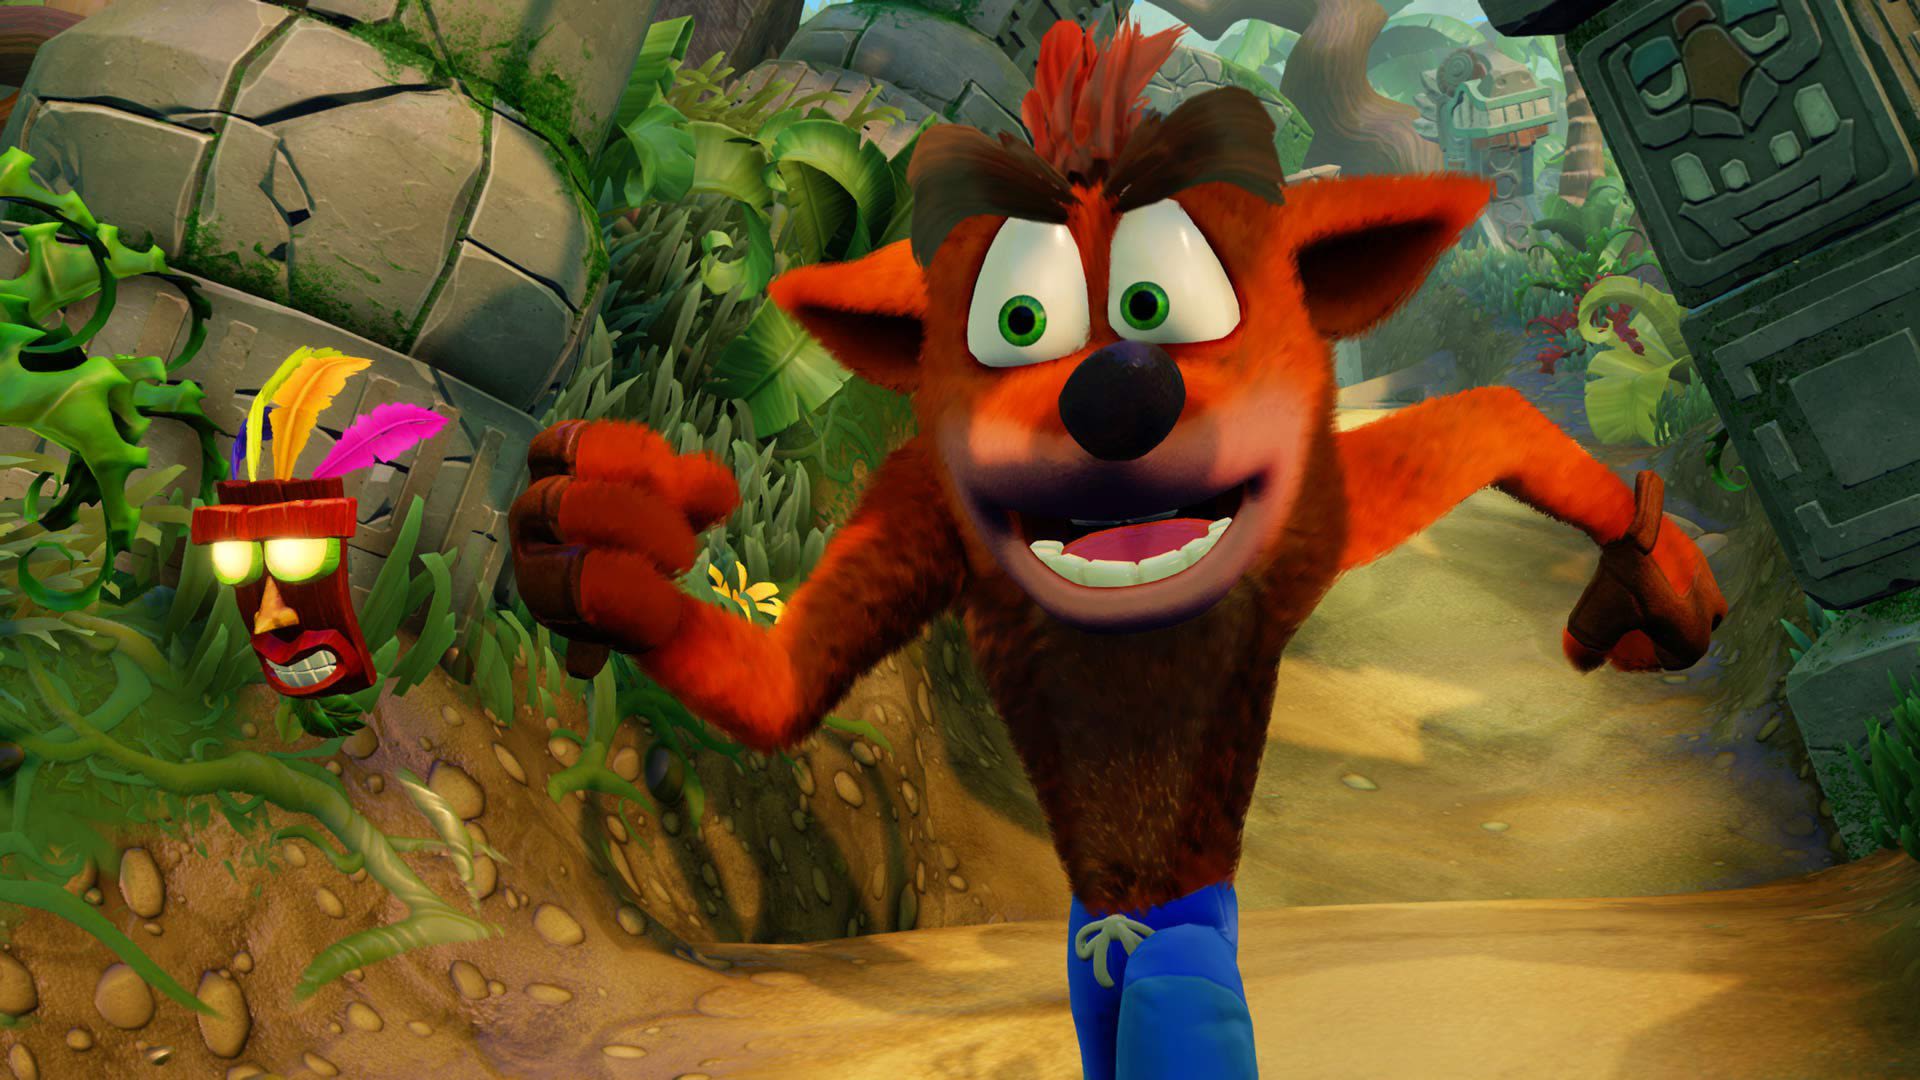 Crash Bandicoot N. Sane Trilogy reportedly hits Game Pass on August 8 | VGC